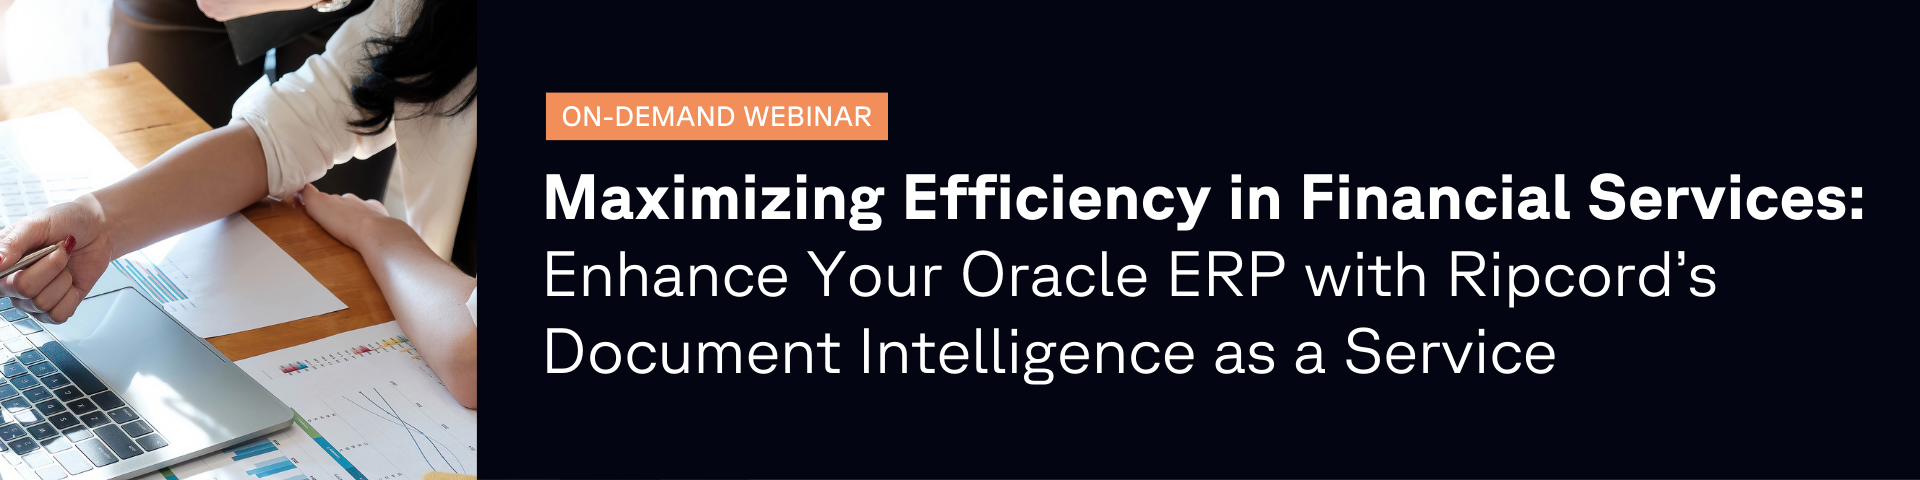 On-Demand Webinar - Maximizing Efficiency in Financial Services Enhance Your Oracle ERP with Ripcord’s Document Intelligence as a Service